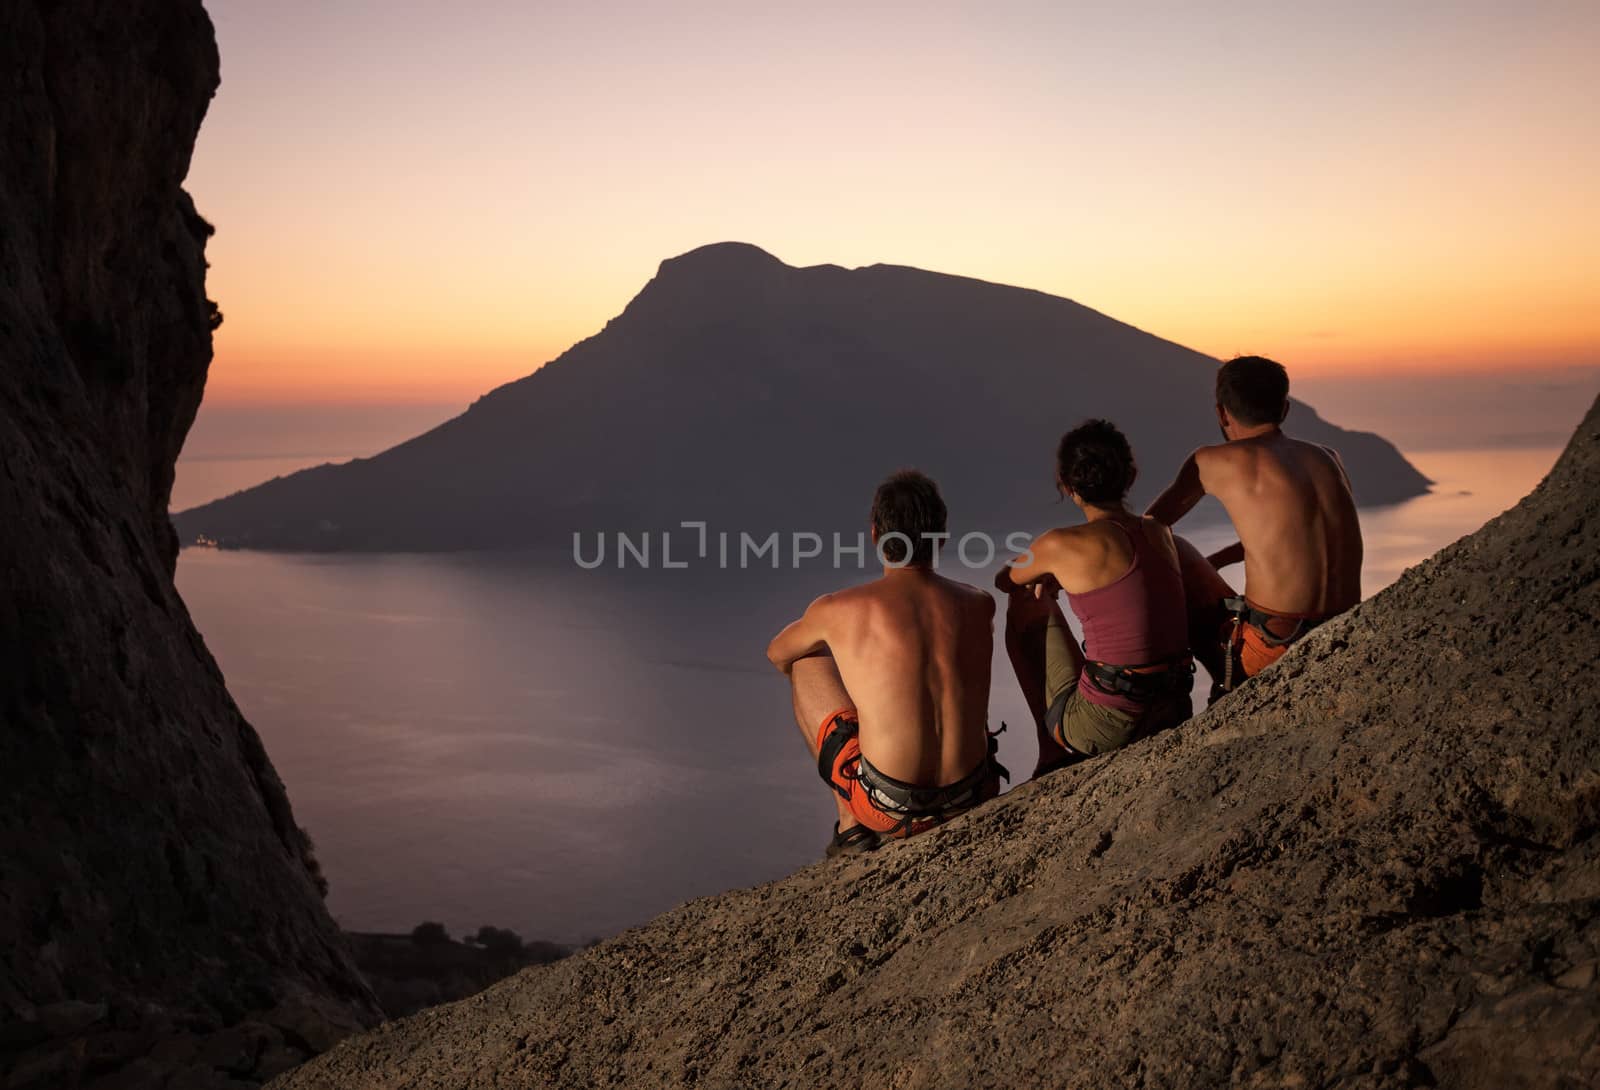 Three rock climbers wearing safety harness having rest at sunset. With picturesque view of Telendos Island in front. Kalymnos Island, Greece.